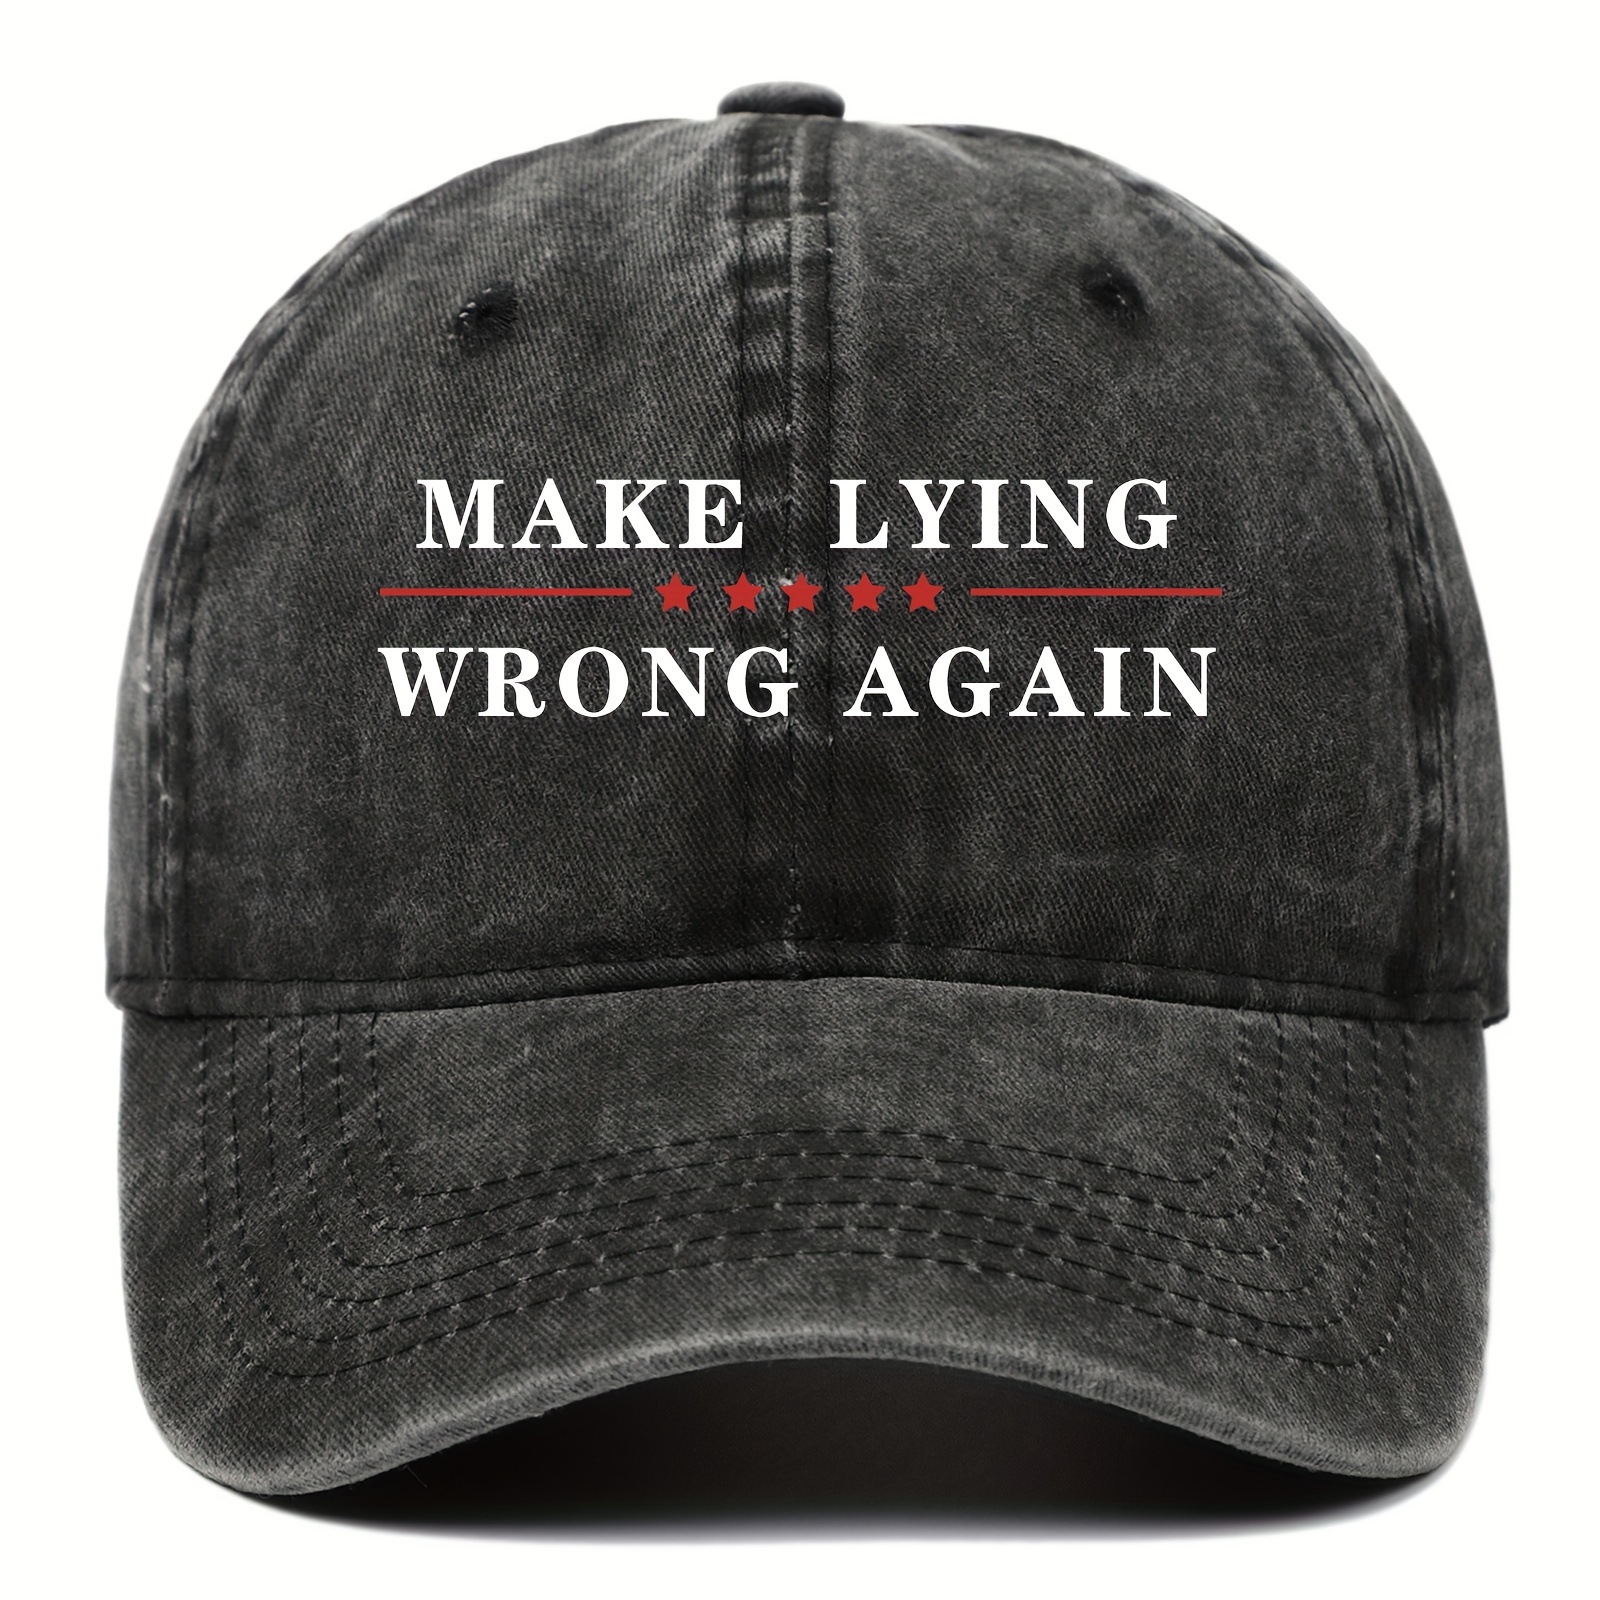 

Cool Hippie Curved Brim Baseball Cap, Make Lying Wrong Again Print Distressed Cotton Trucker Hat, Snapback Hat For Casual Leisure Outdoor Sports